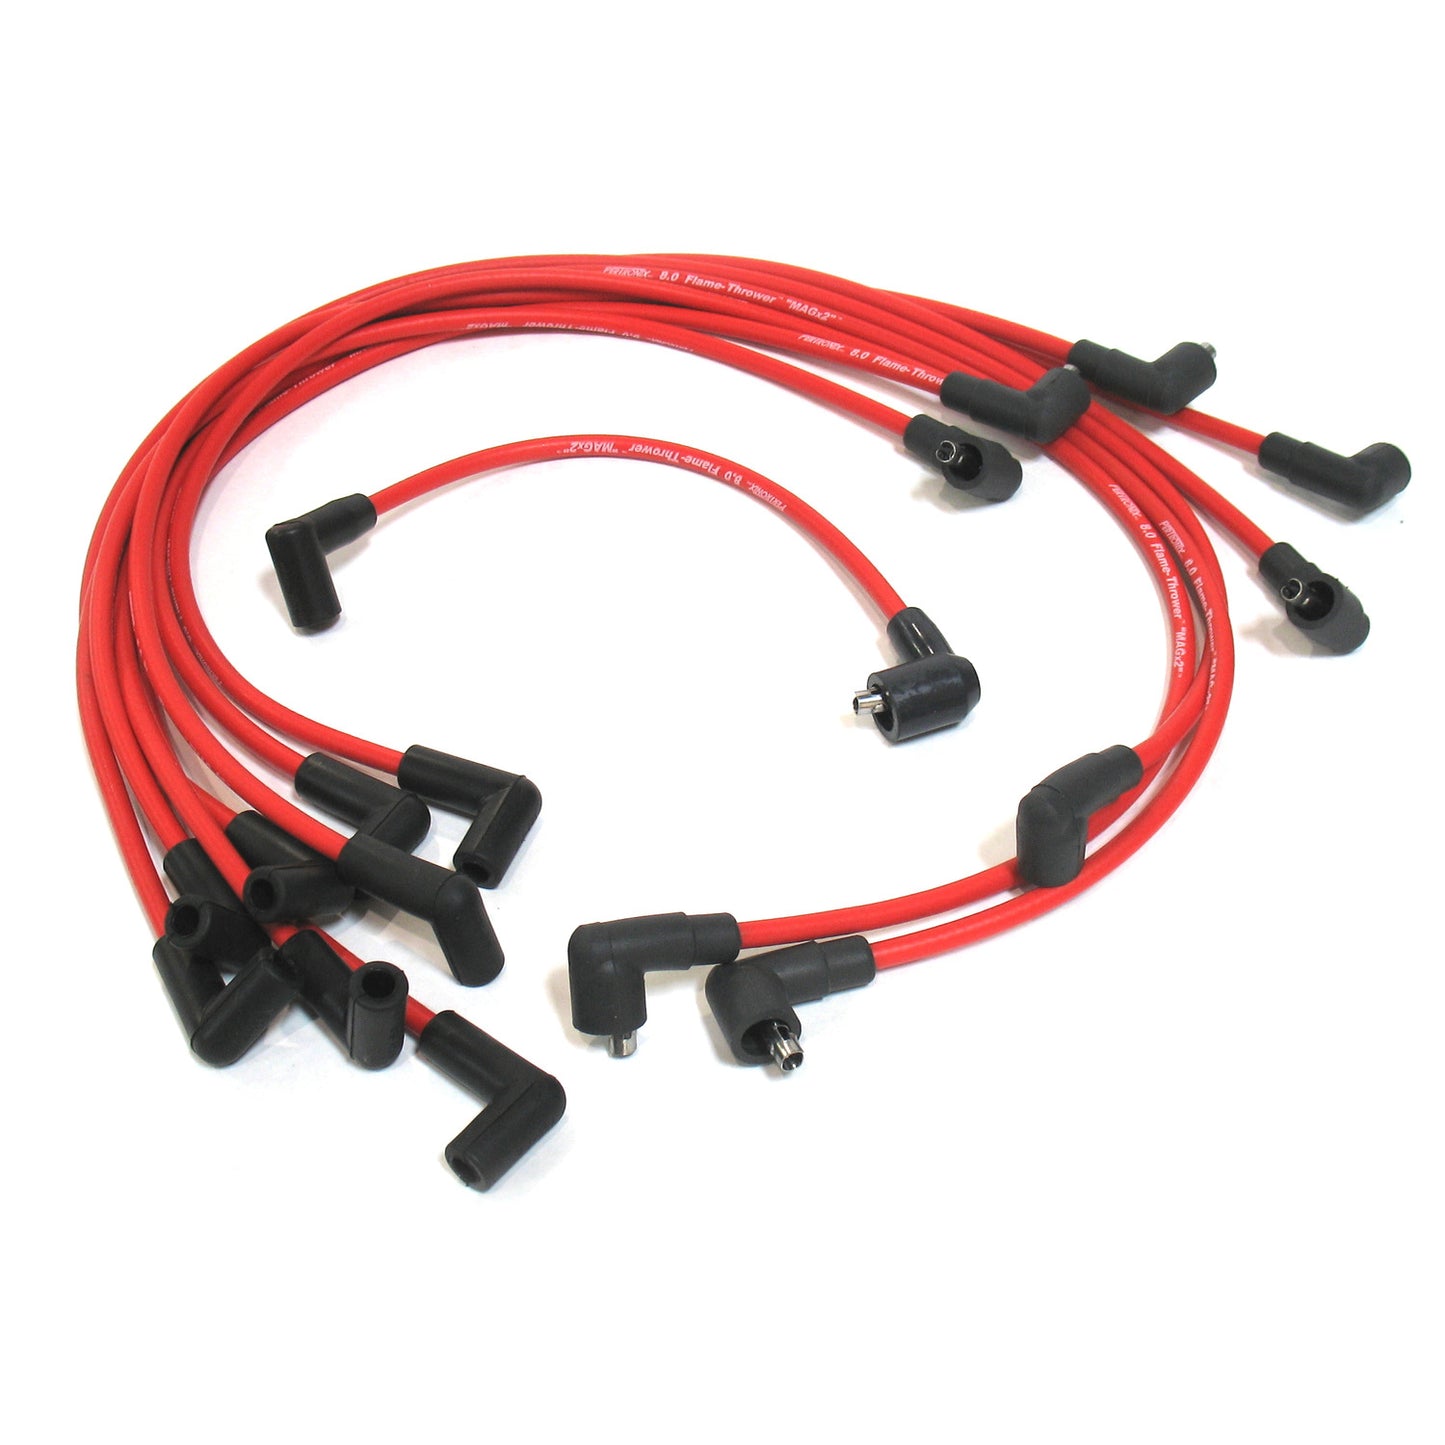 PerTronix 808450 Flame-Thrower Spark Plug Wires 8 cyl 8mm Chevrolet Marine 90 Degree Red